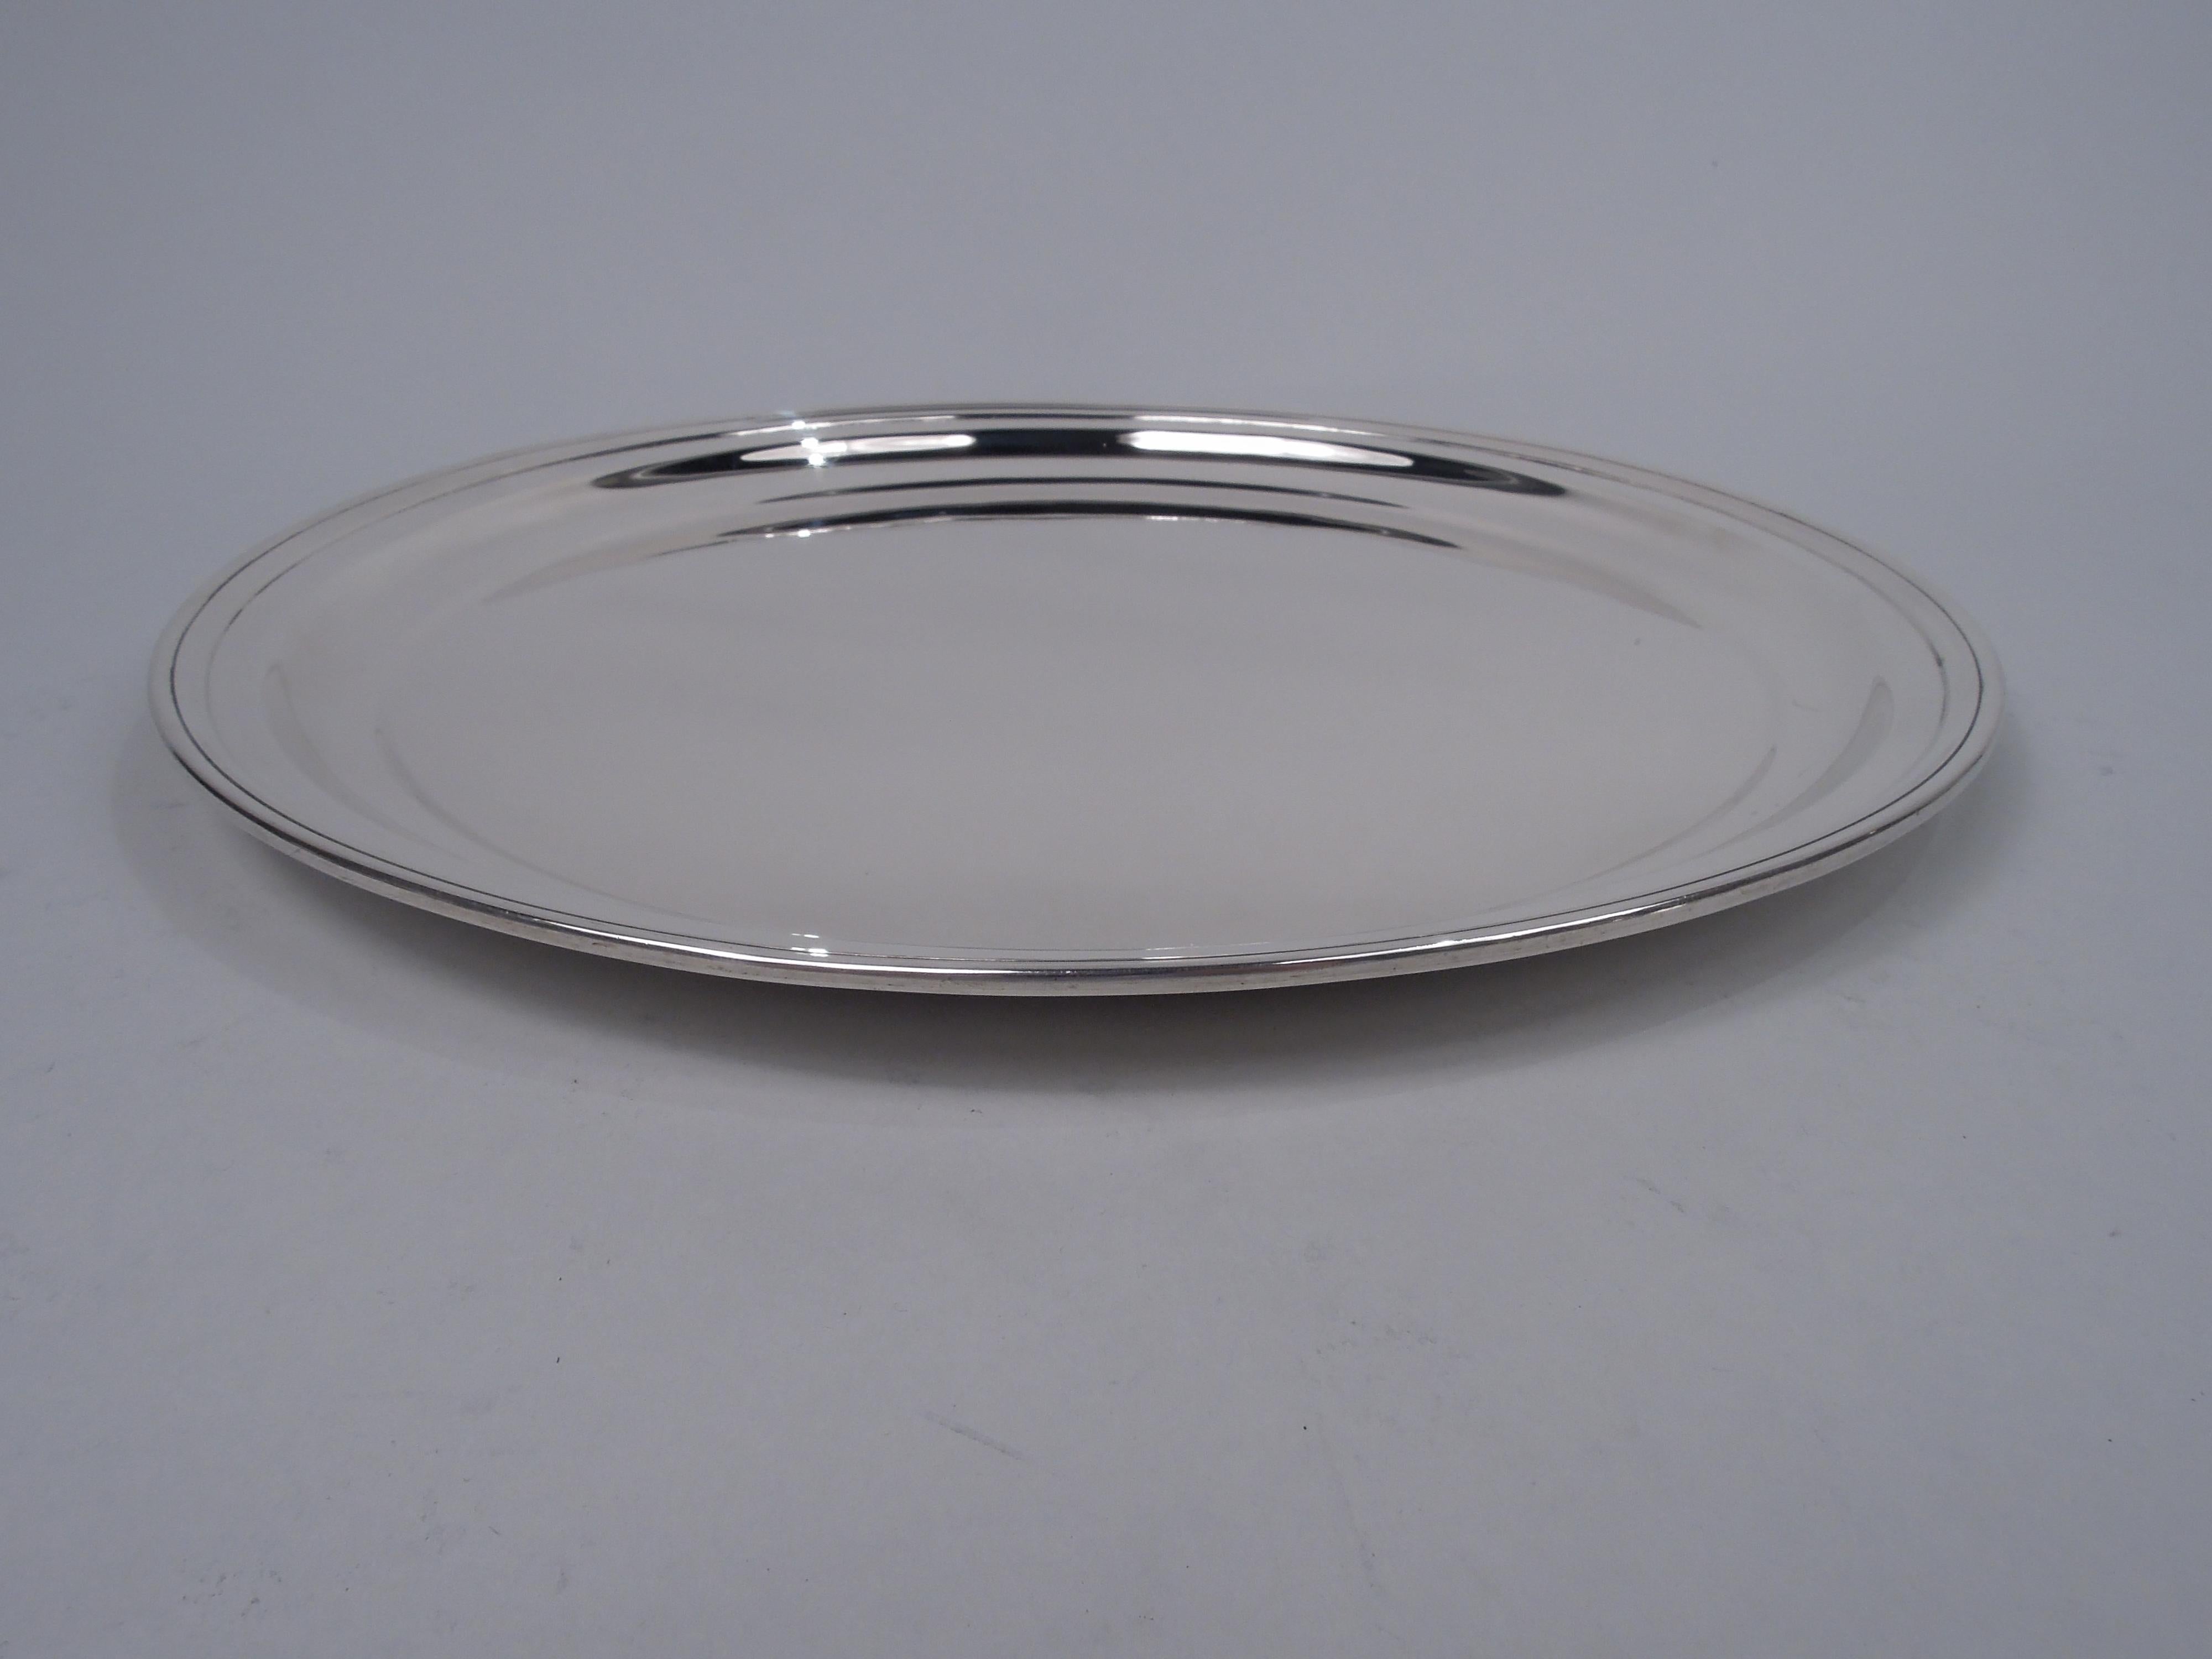 Modern sterling silver tray. Made by Arthur Stone in Gardner, Mass., ca 1930. Round well with curved sides, tapering shoulder, and molded rim. Fully marked including maker’s stamp and craftsman’s initial T for Herbert A. Taylor, who was active from